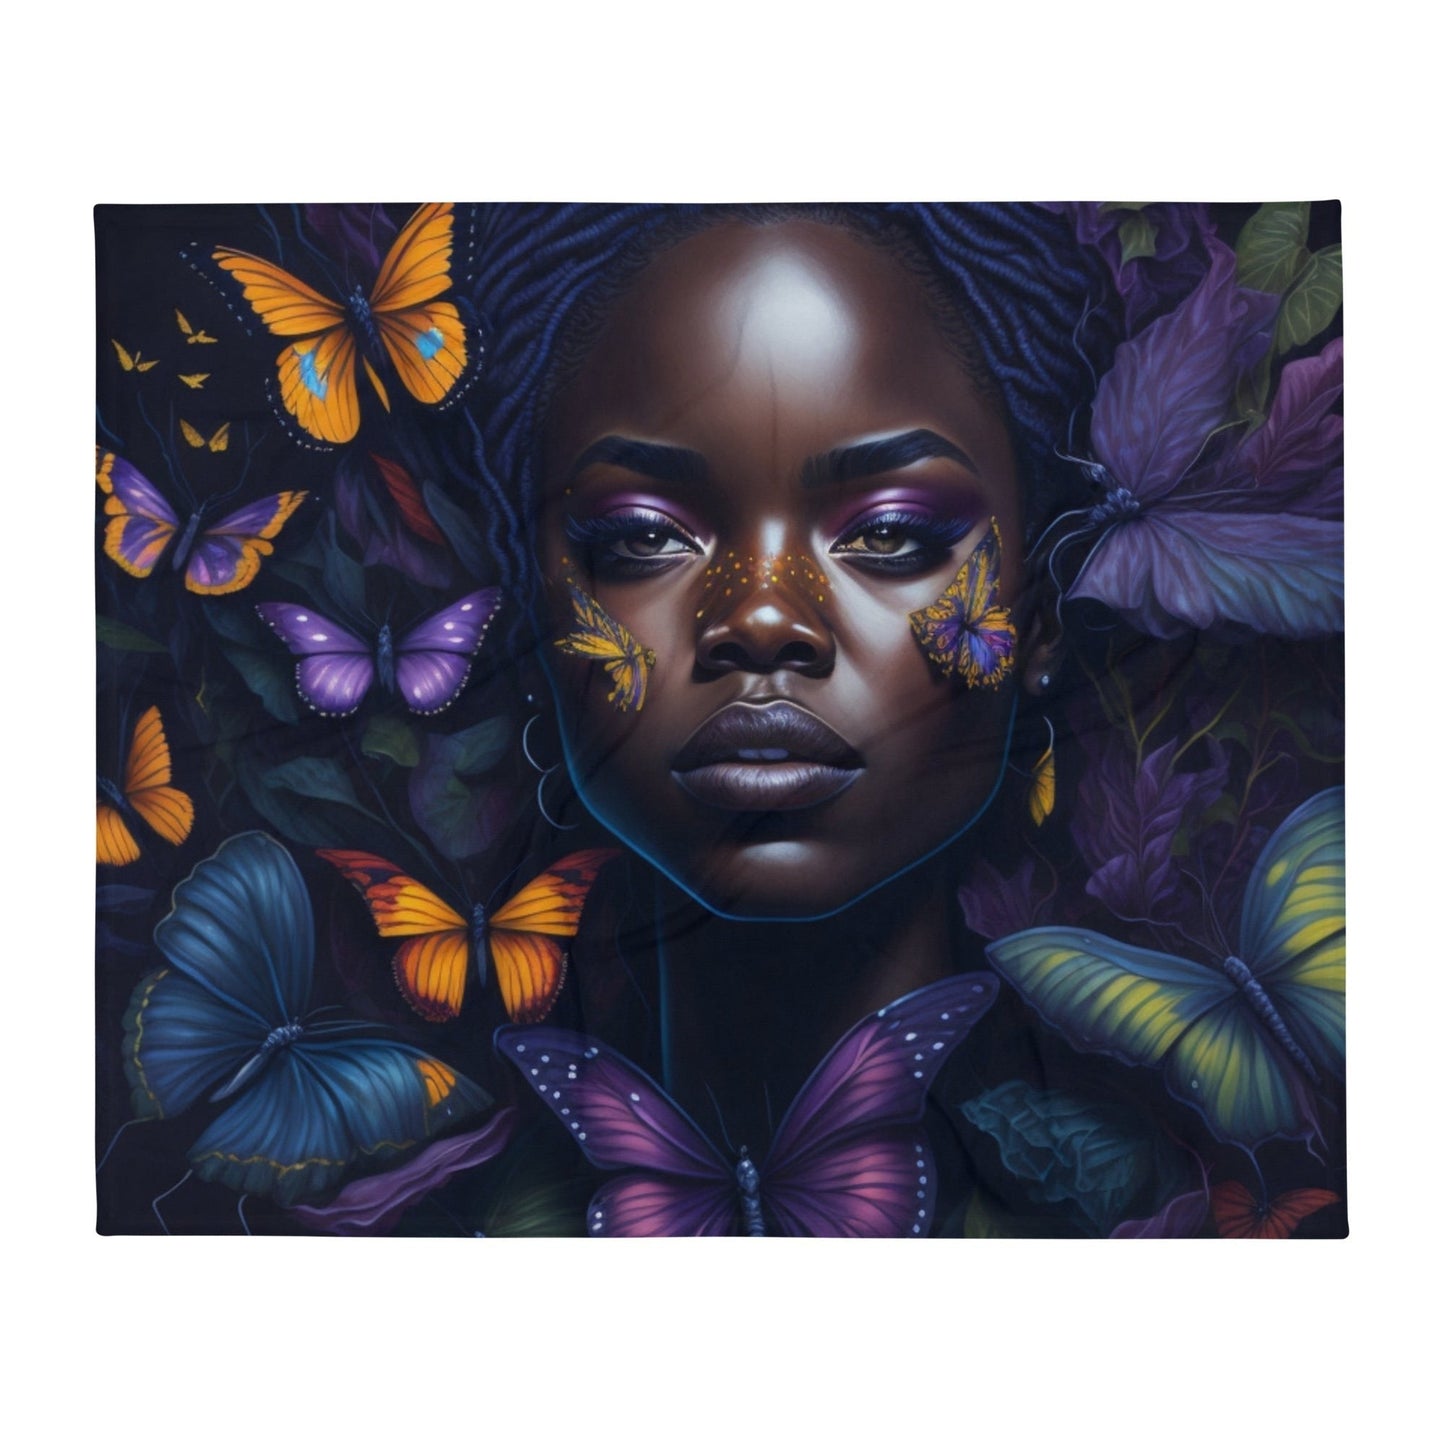 Graceful Wings: Portrait of an African American Woman with Fluttering Butterflies Throw Blanket-THROW BLANKET-50″×60″-Nature's Muse-mysticalcherry